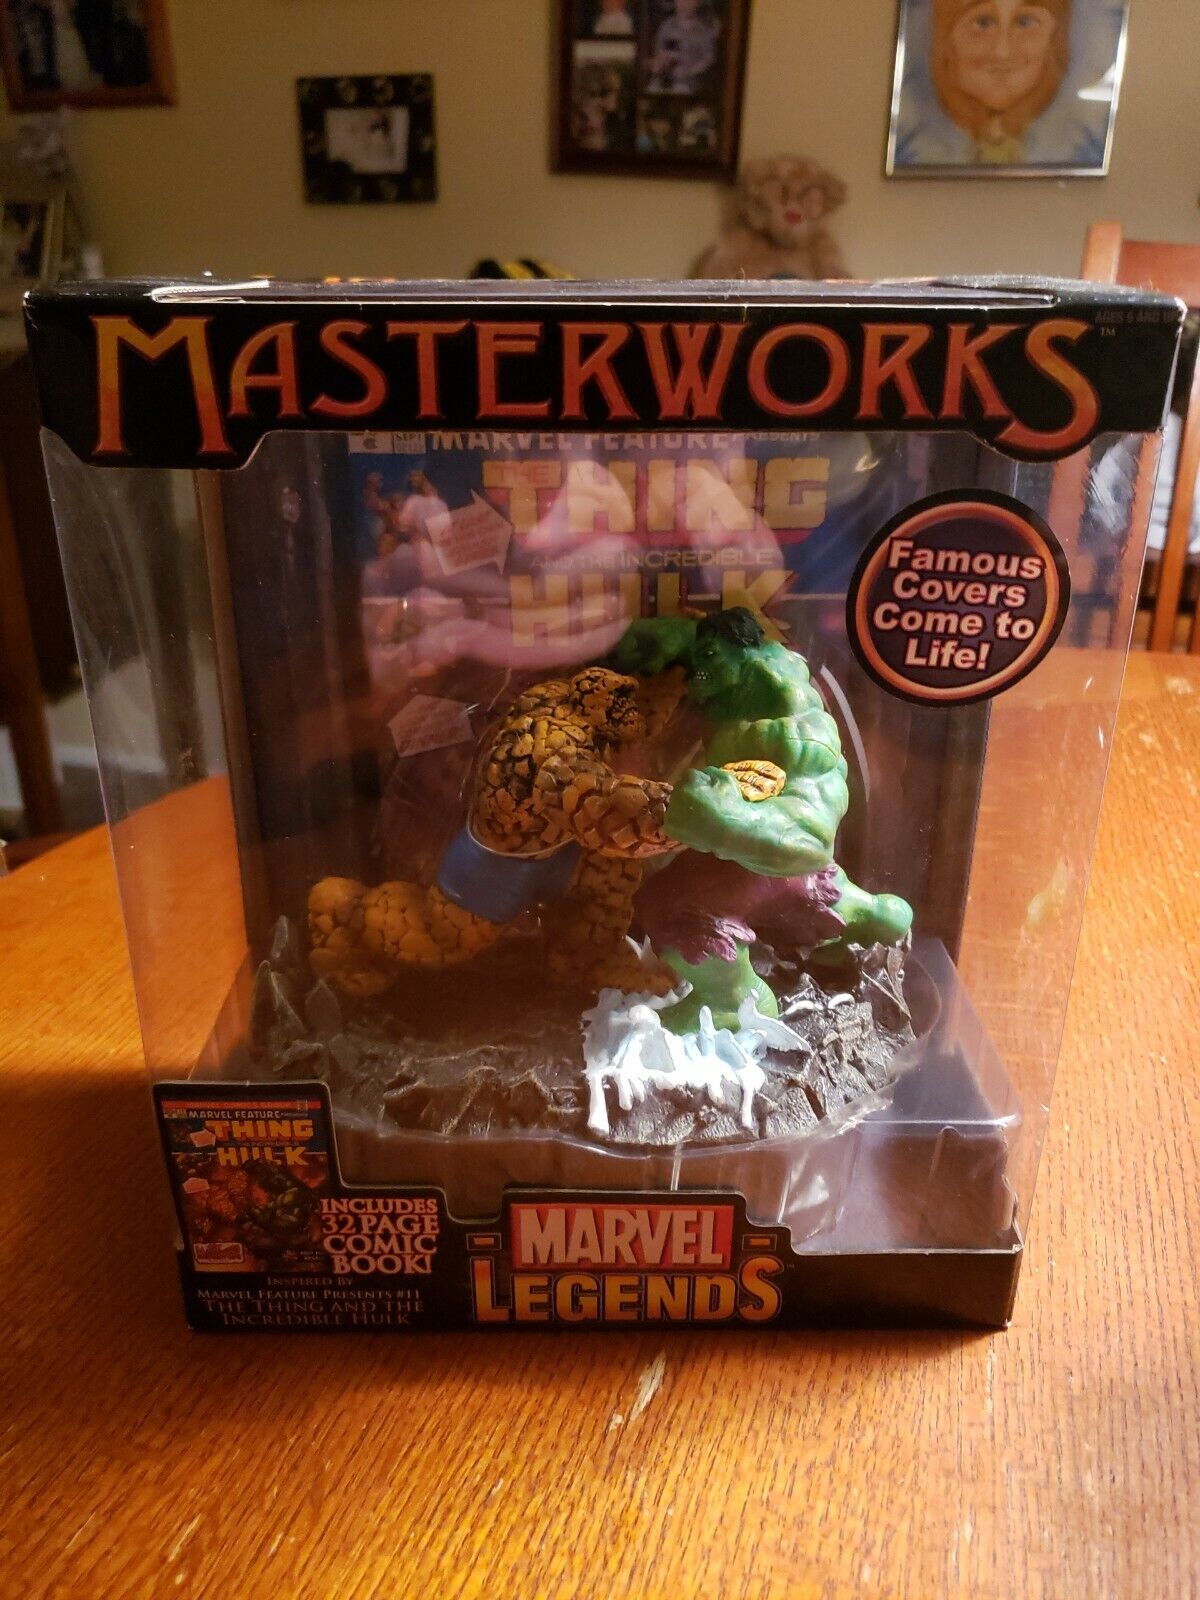 Marvel Legends Masterworks The THING and THE INCREDIBLE HULK